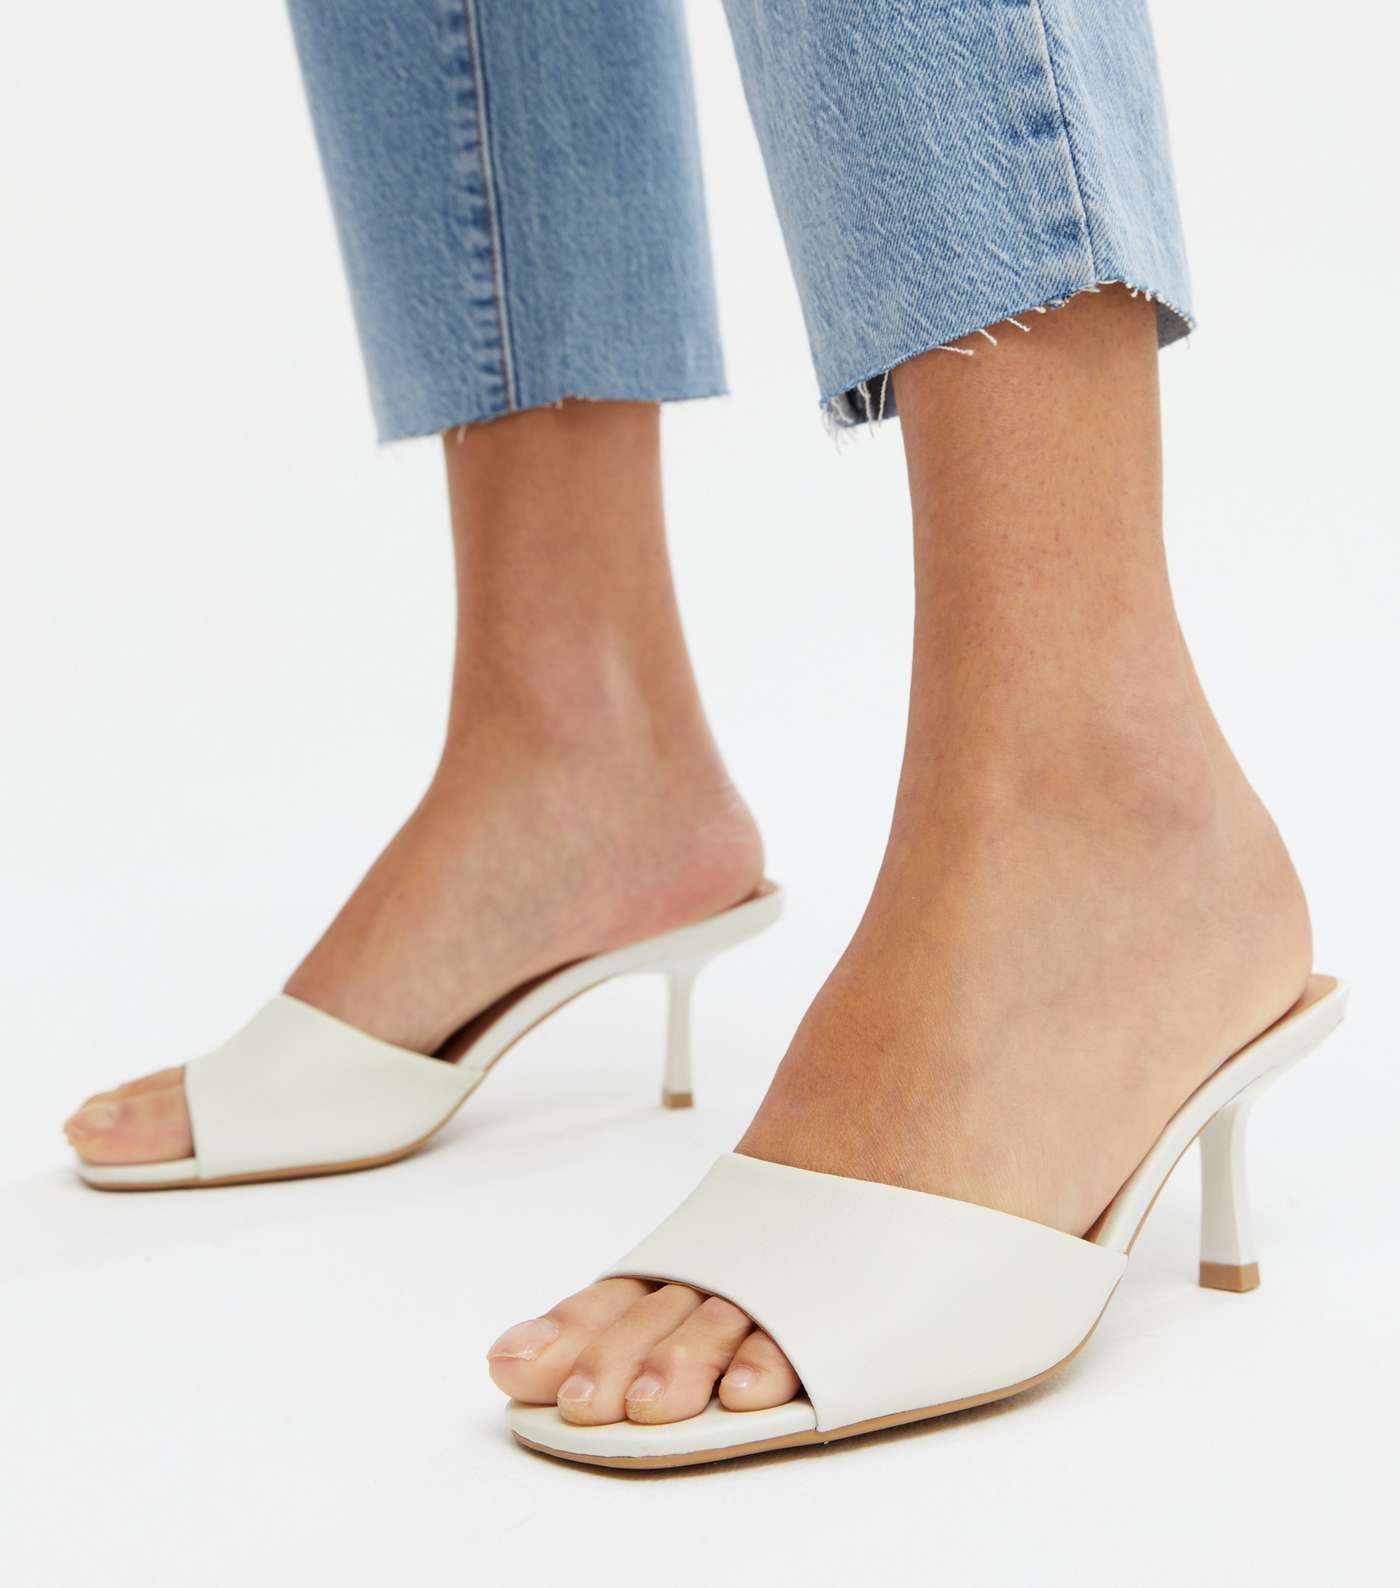 White Leather-Look Square Toe Kitten Heel Mules Image 2